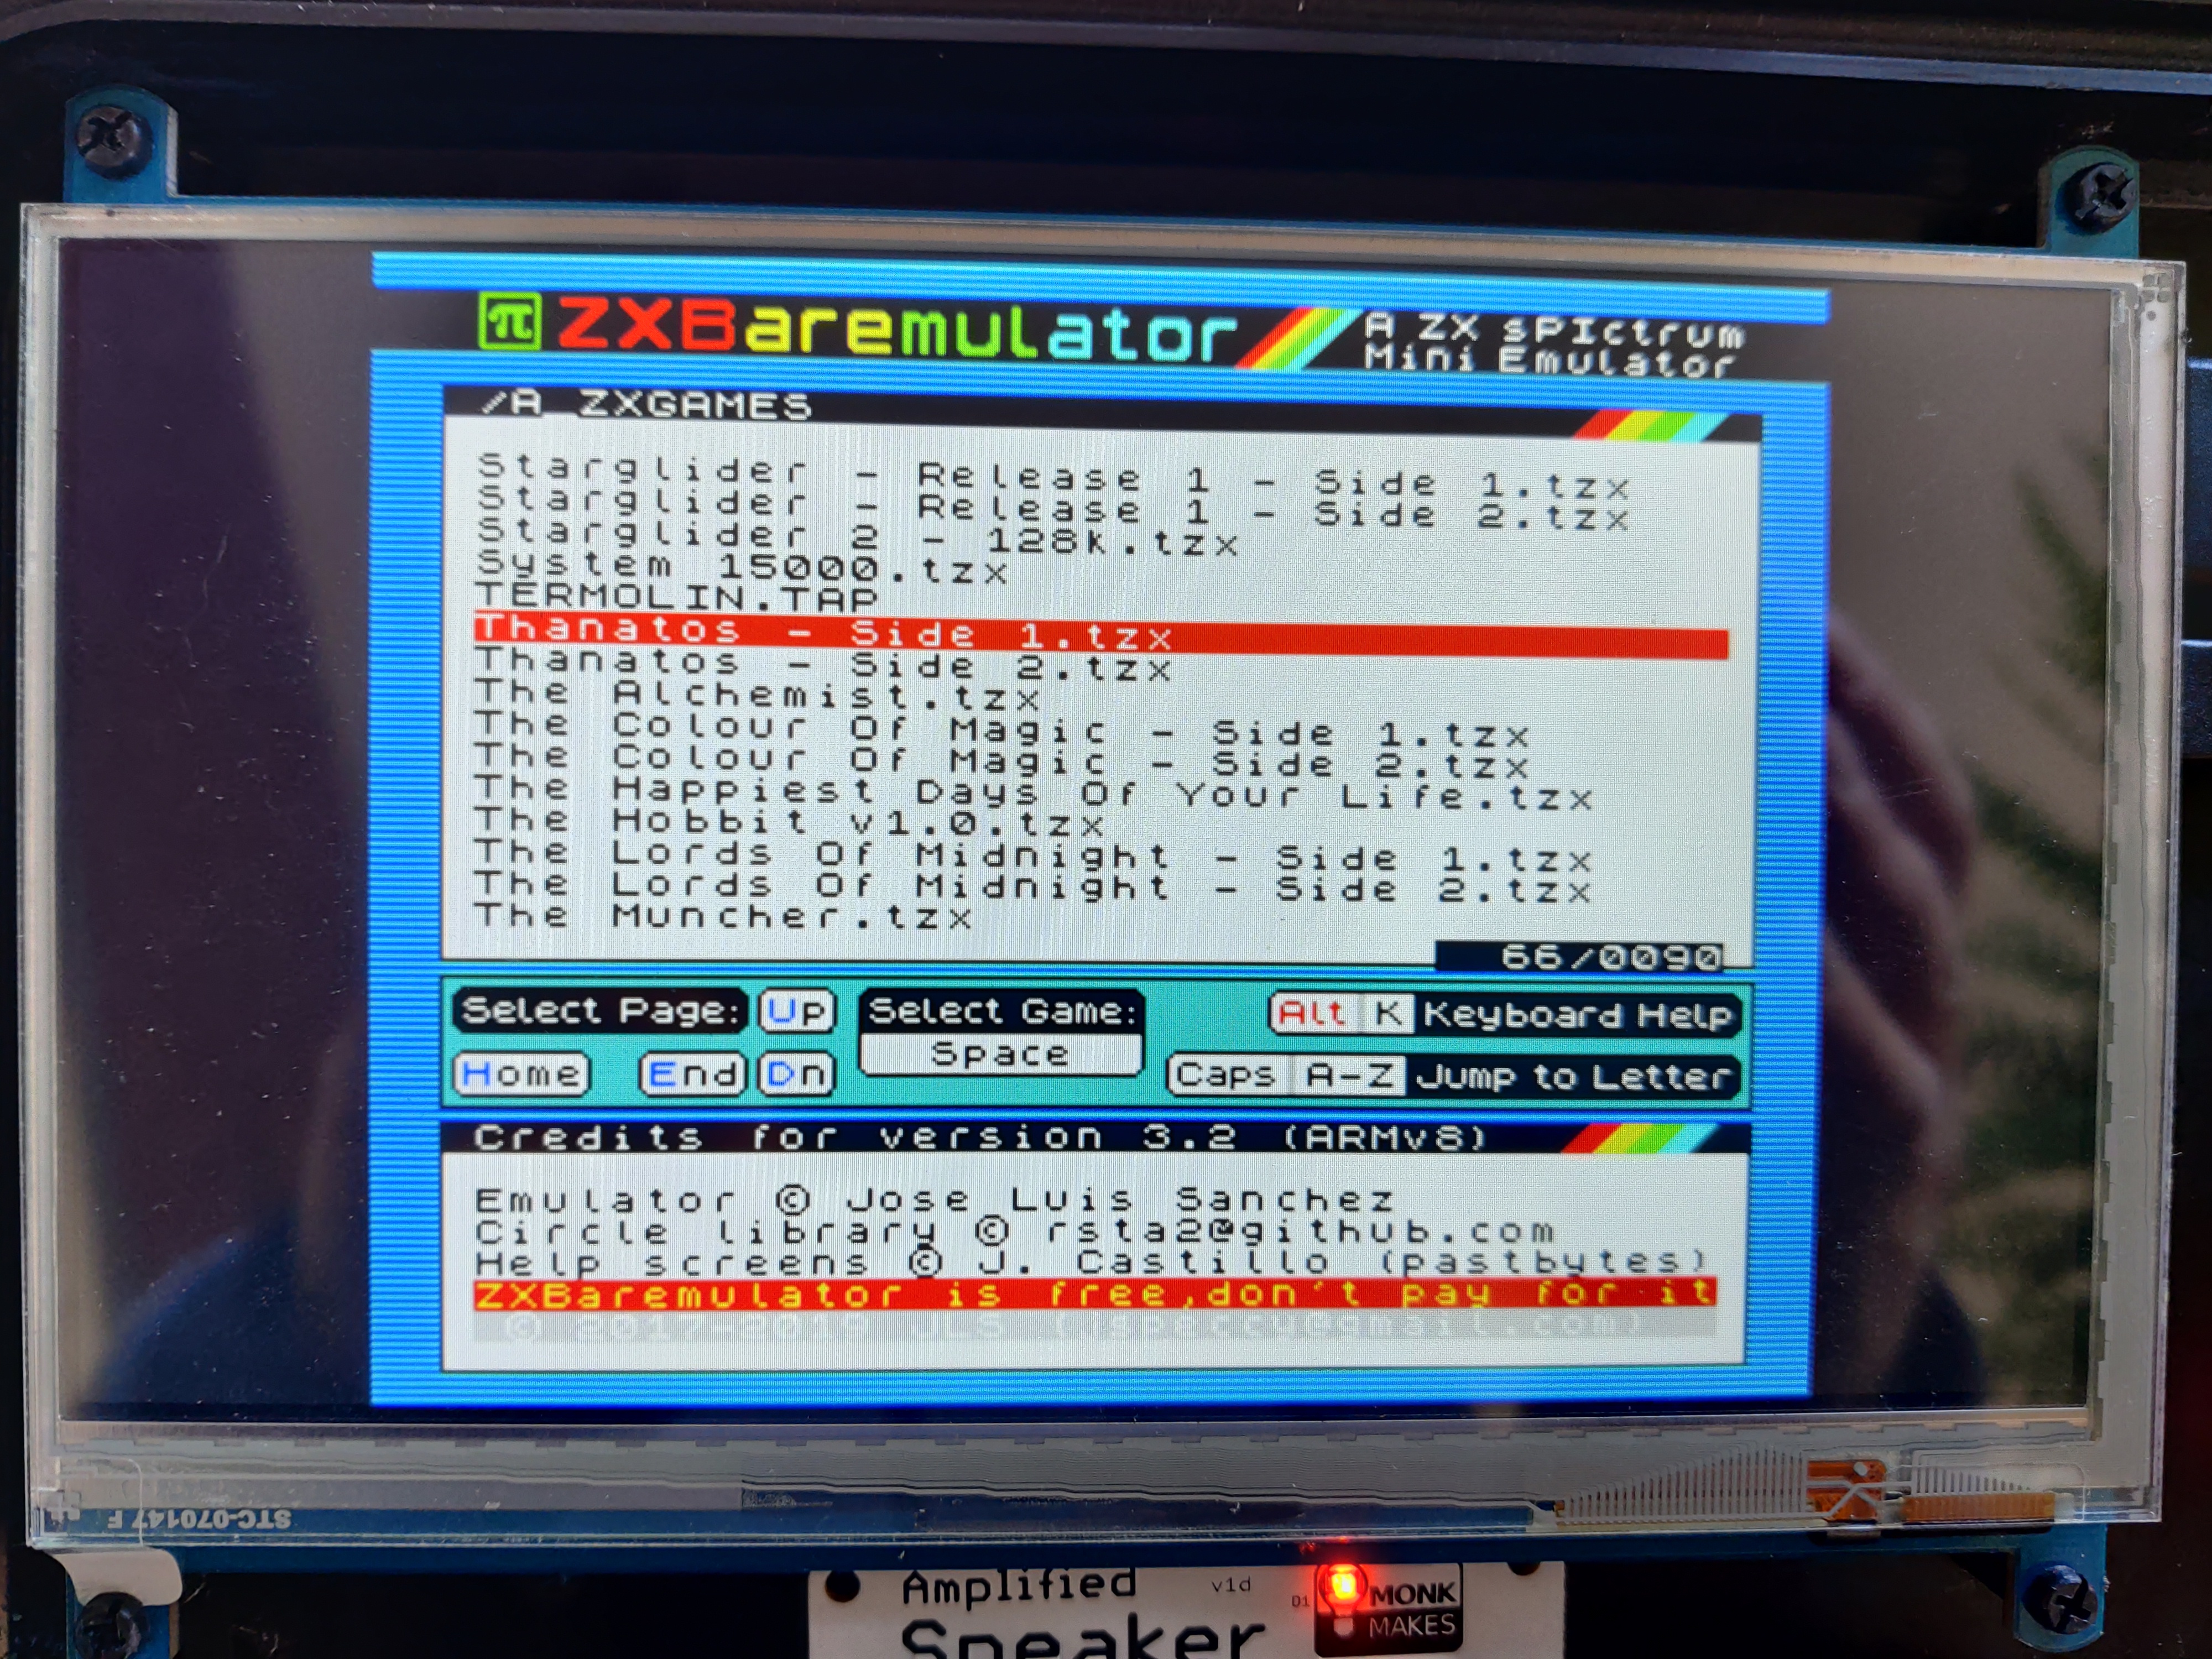 The above-mentioned tape selection screen. It has the ZXBareEmulator logo at the top followed by a list of files from the SD card. The currently selected file is "Thanatos Side 1.tzx"